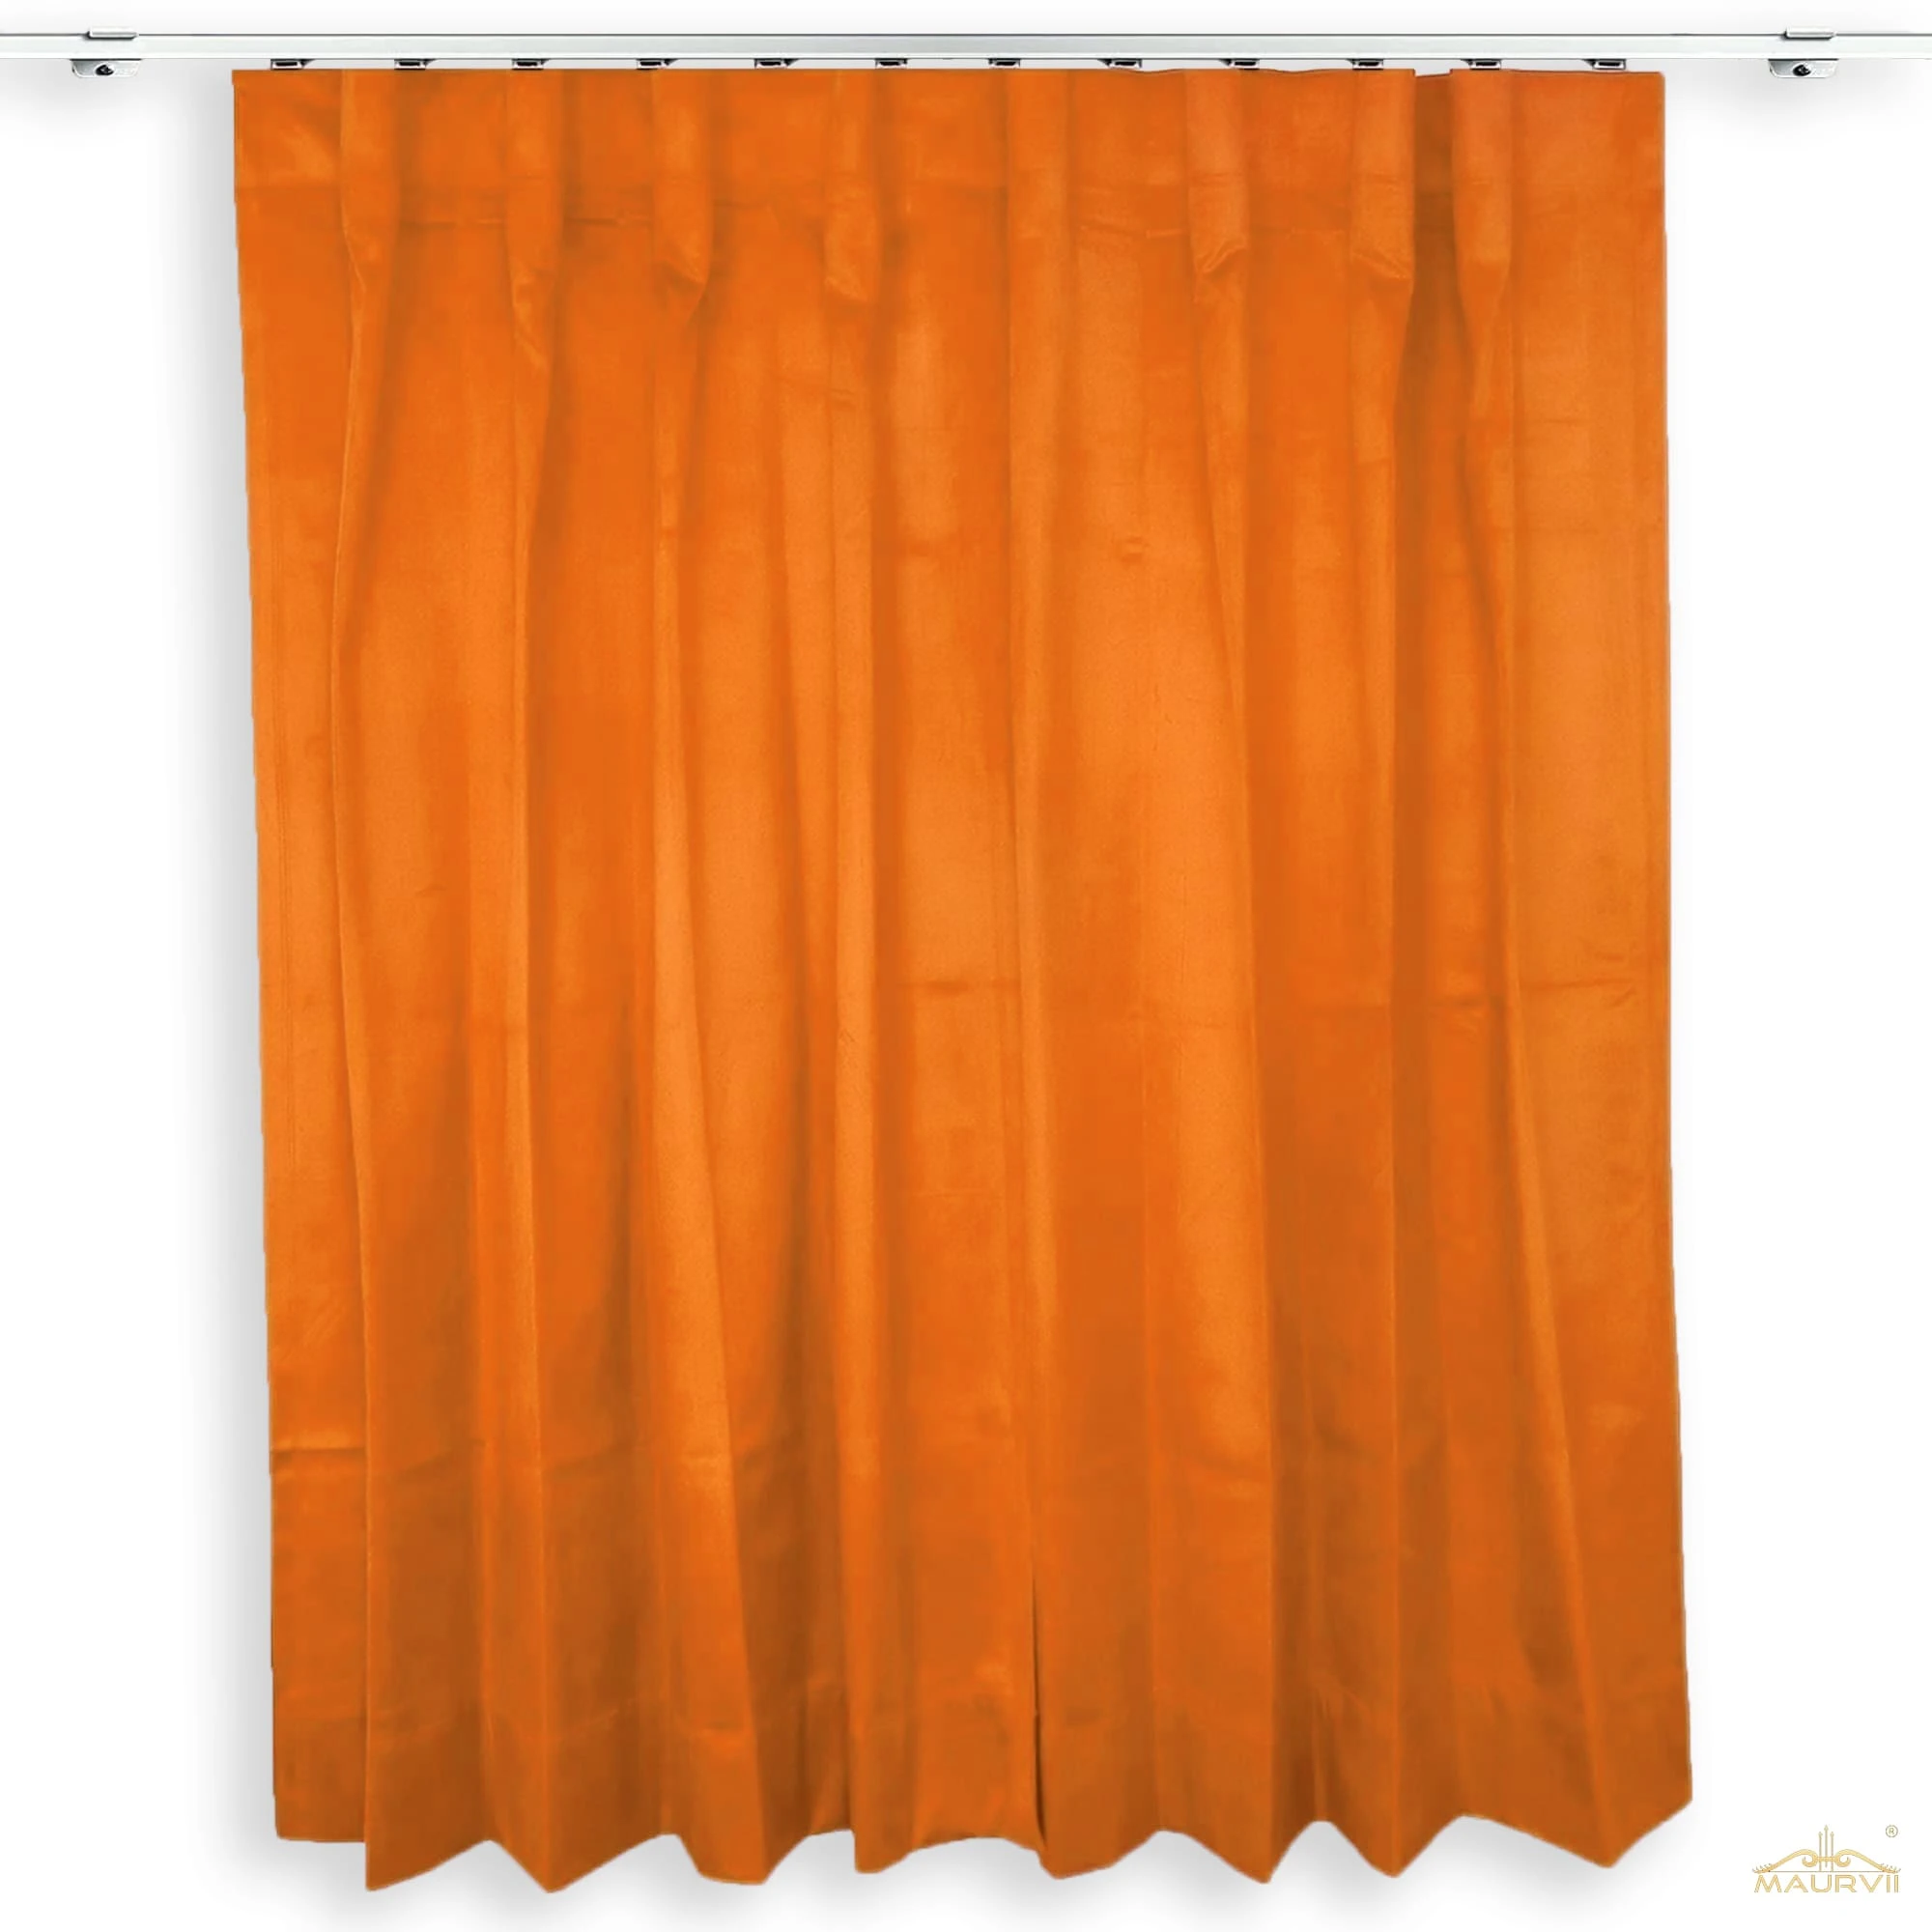 Rust color curtains